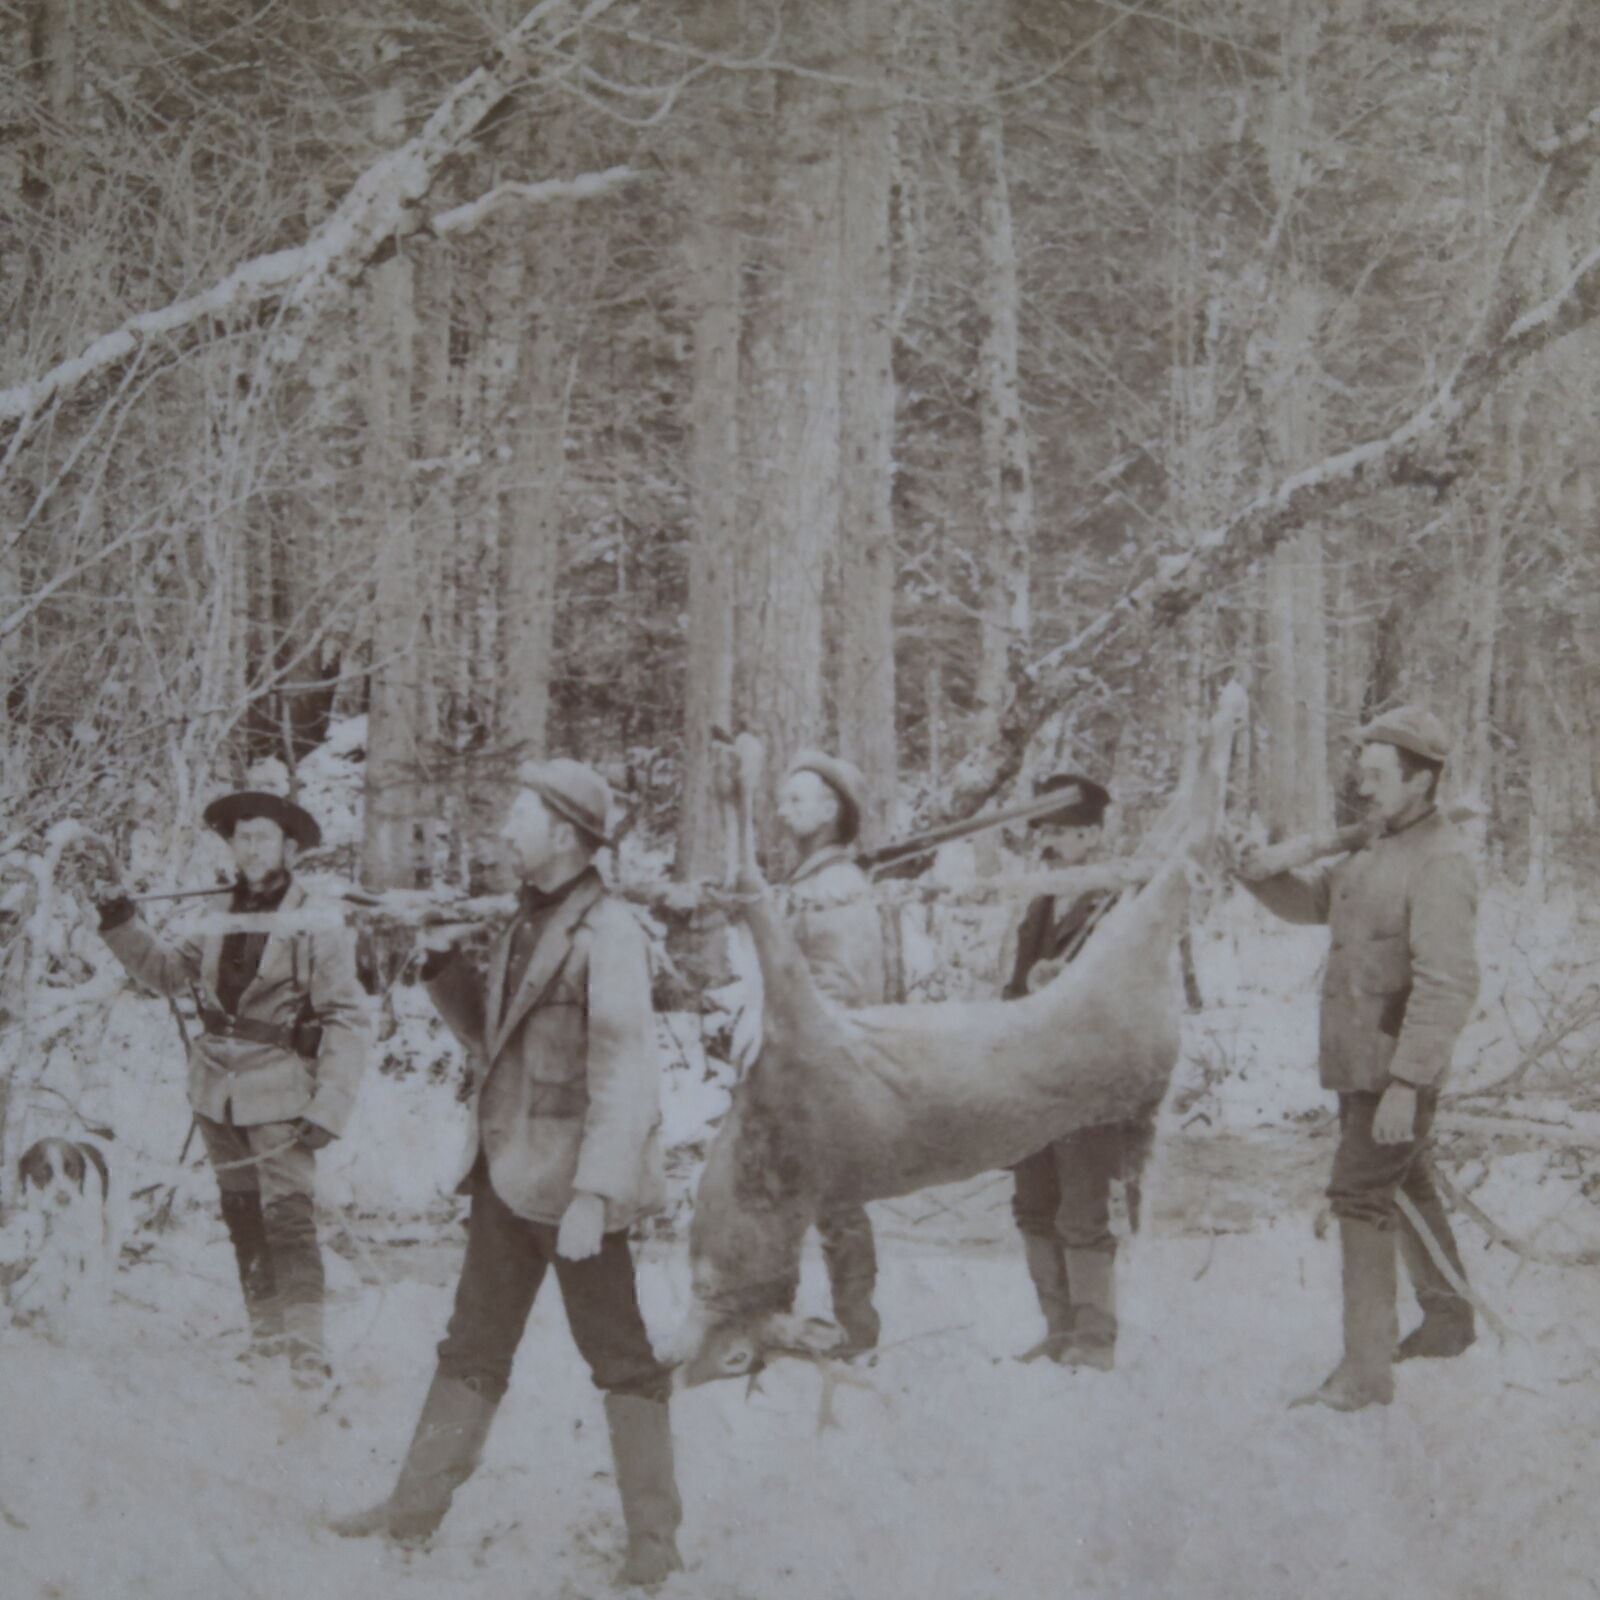 c1900 Hunting Group Carry Very Large Buck from Woods Stereoview A5